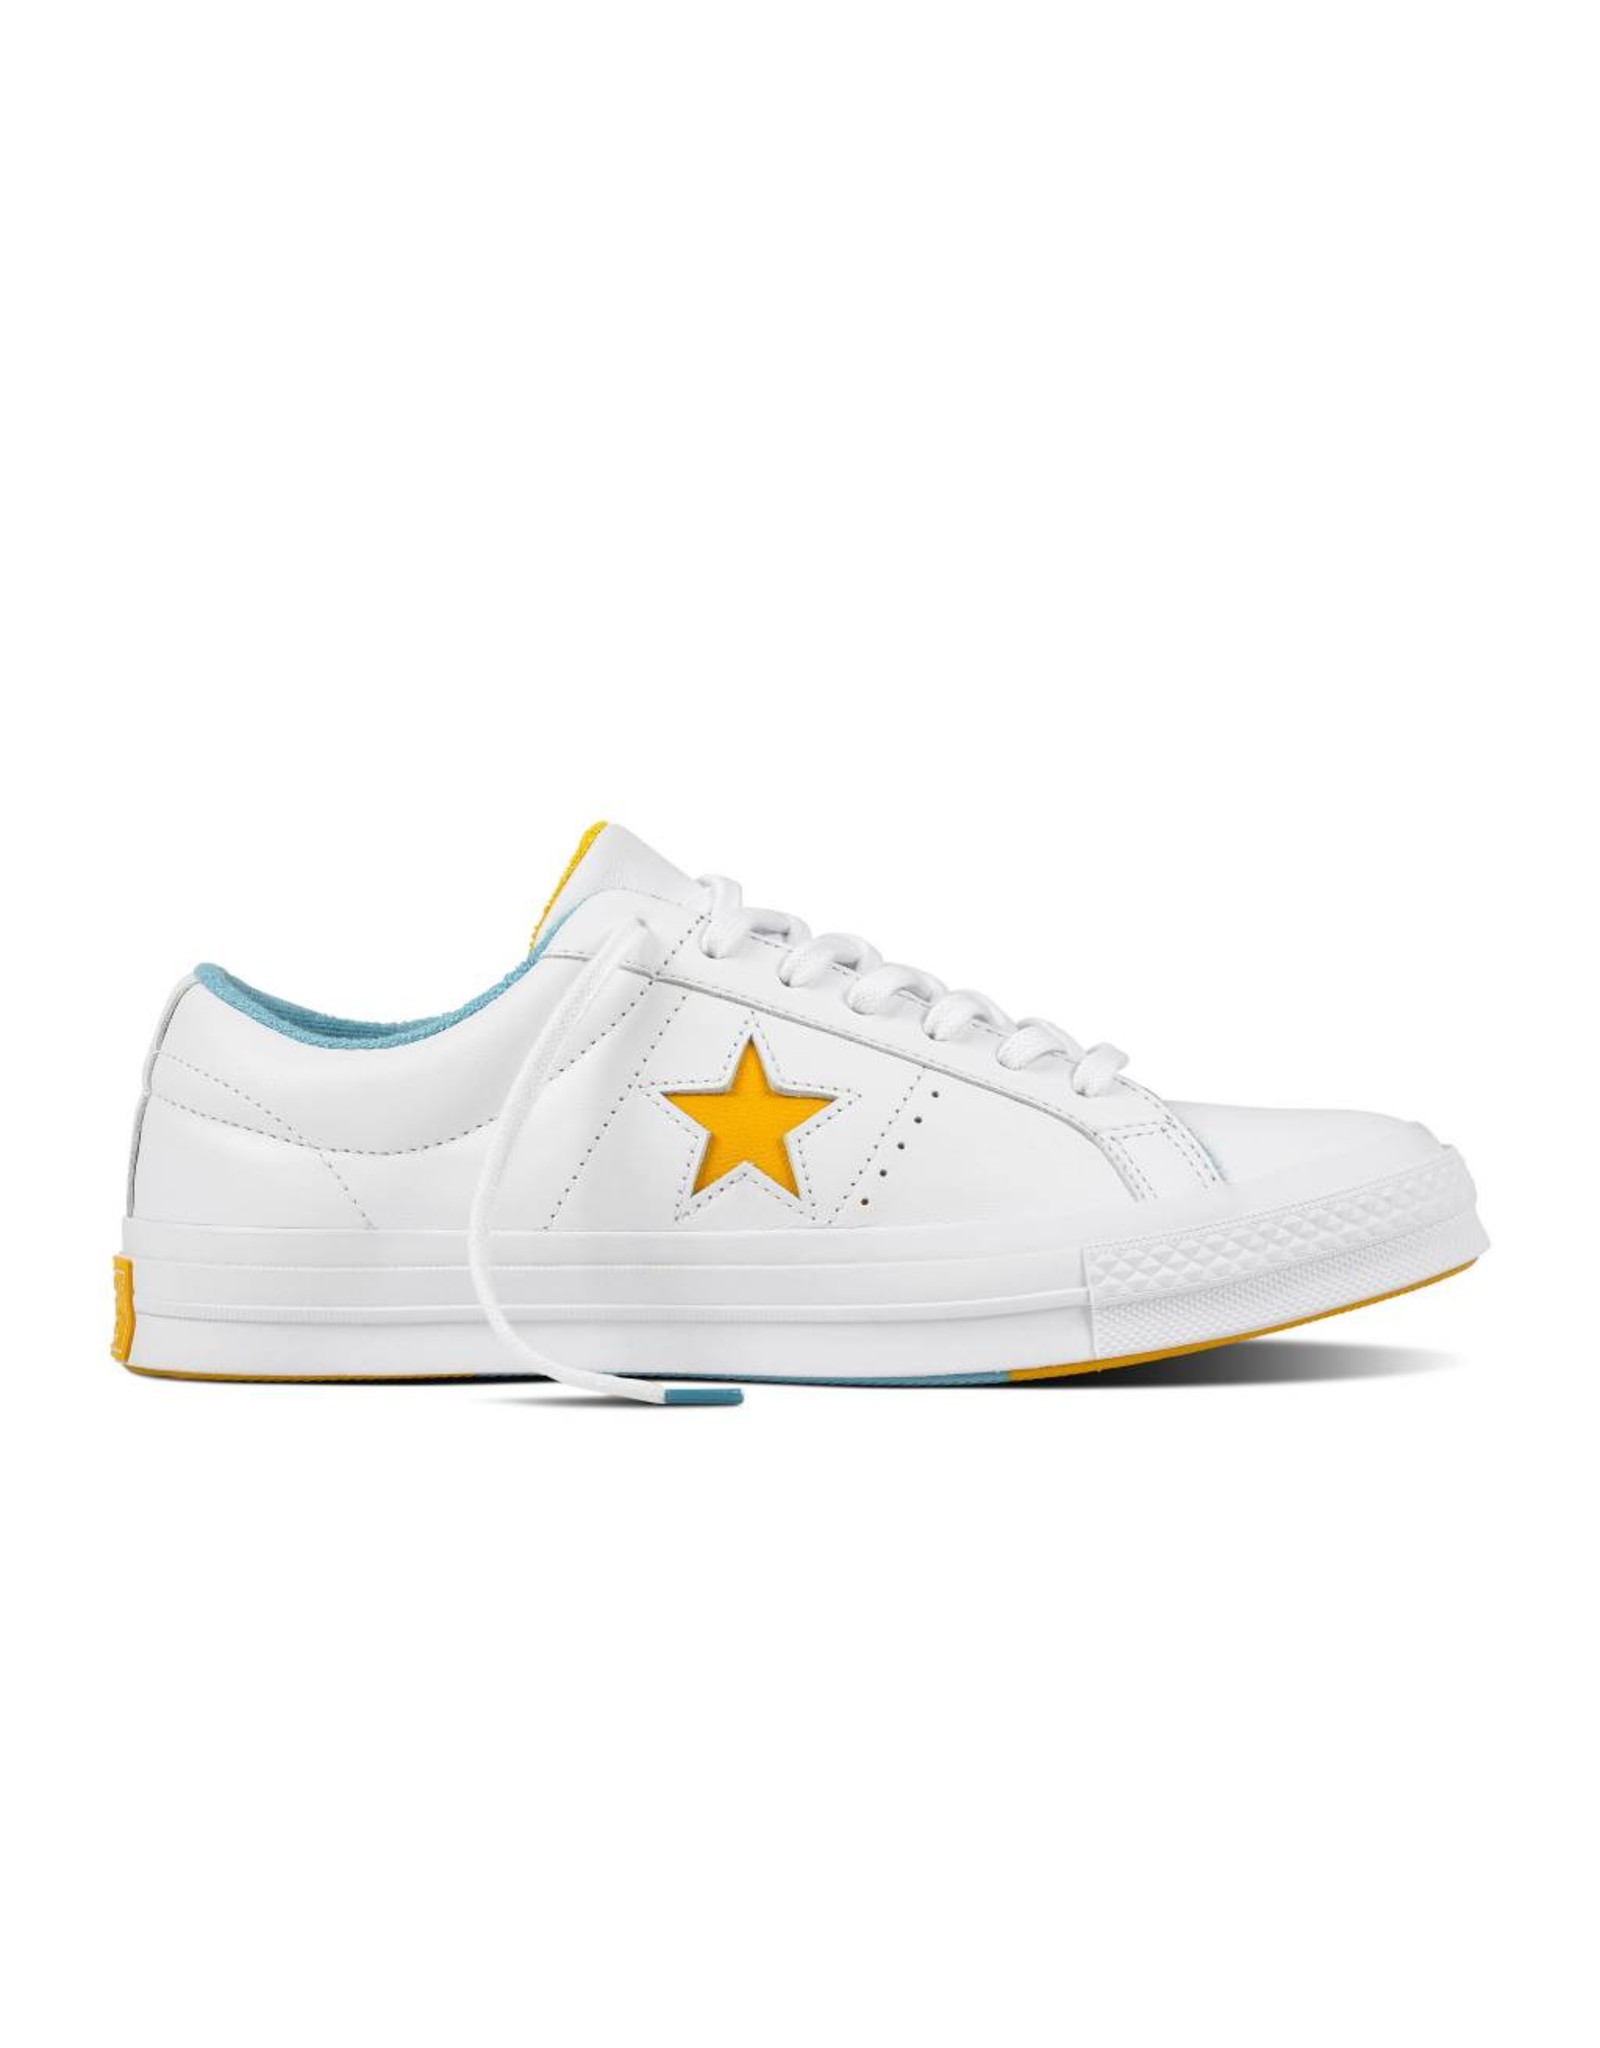 white leather converse one star